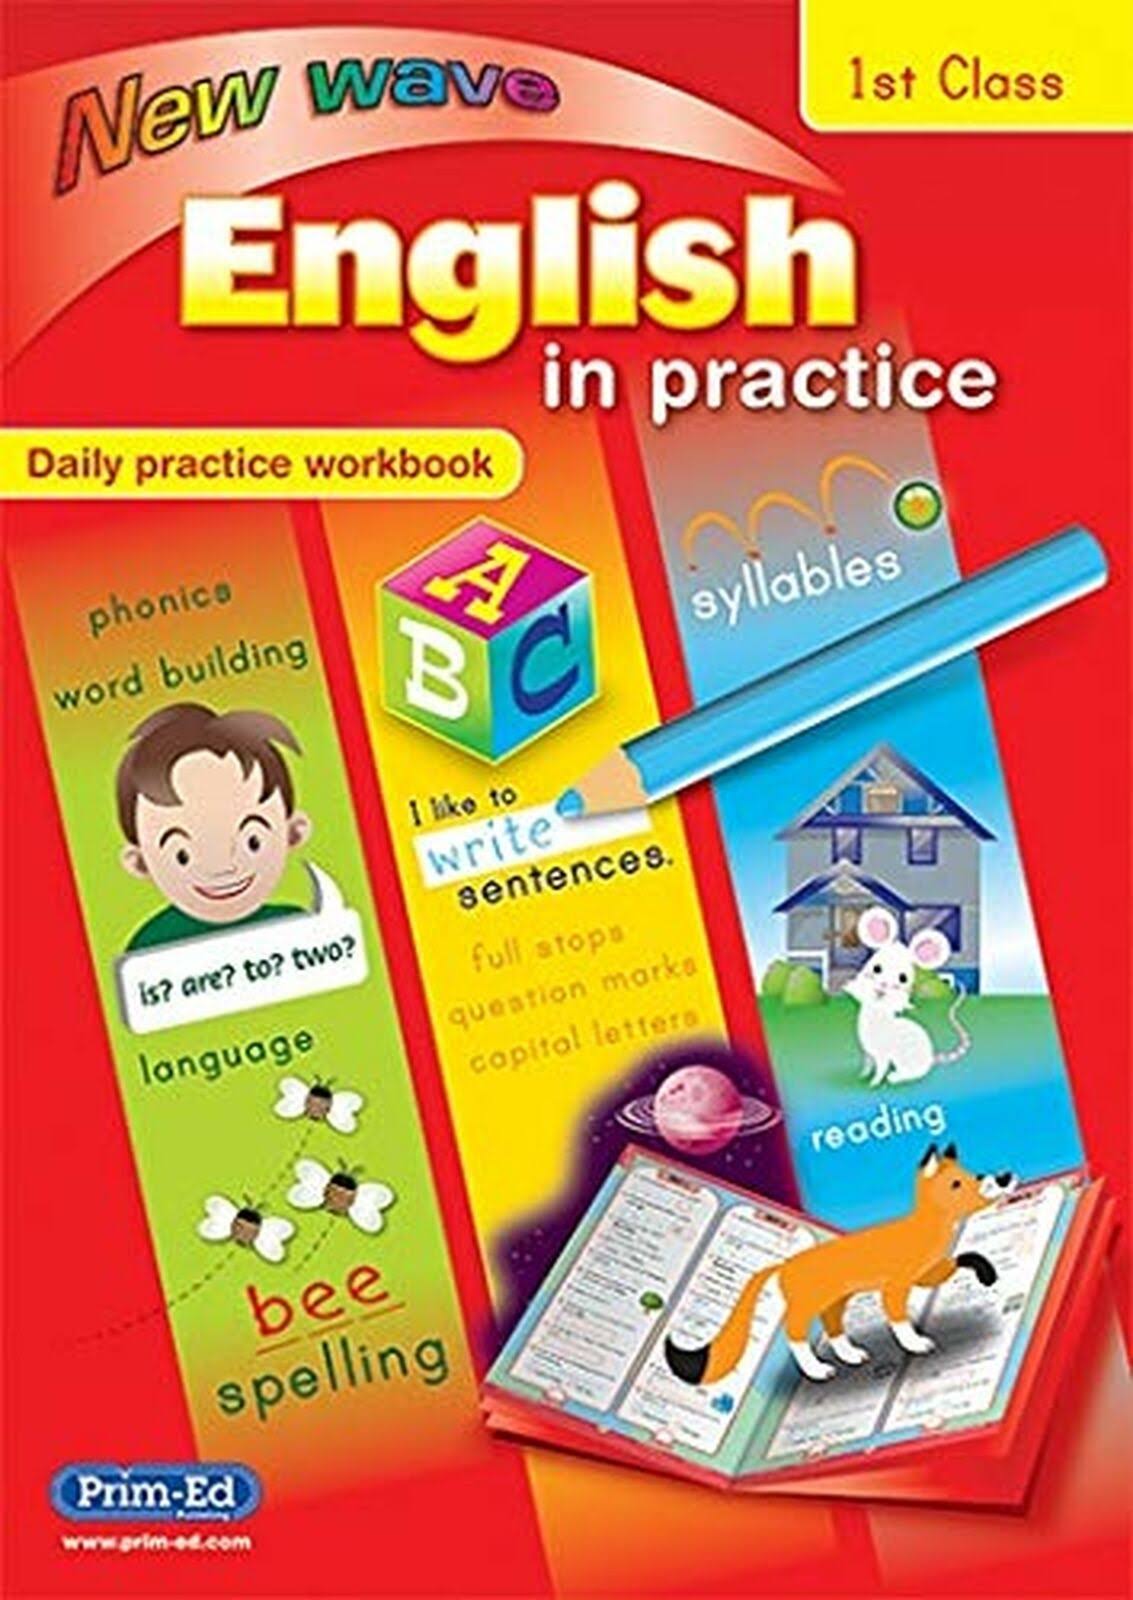 New Wave English in Practice: Daily Practice Workbook